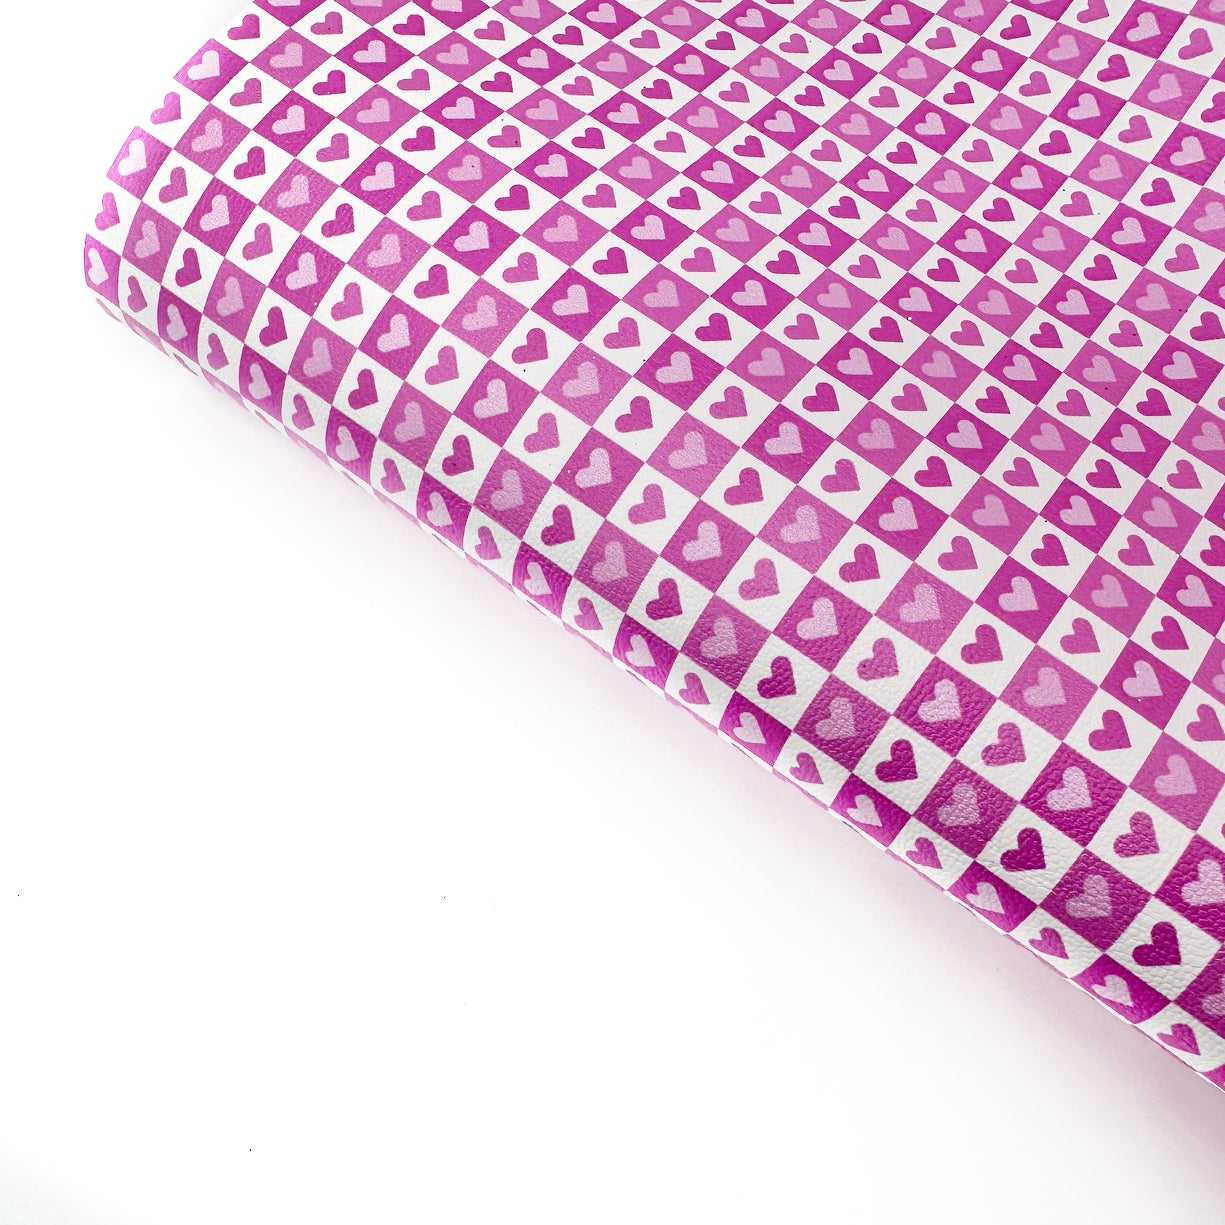 Retro Pink Love Hearts Check Premium Faux Leather Fabric Sheets